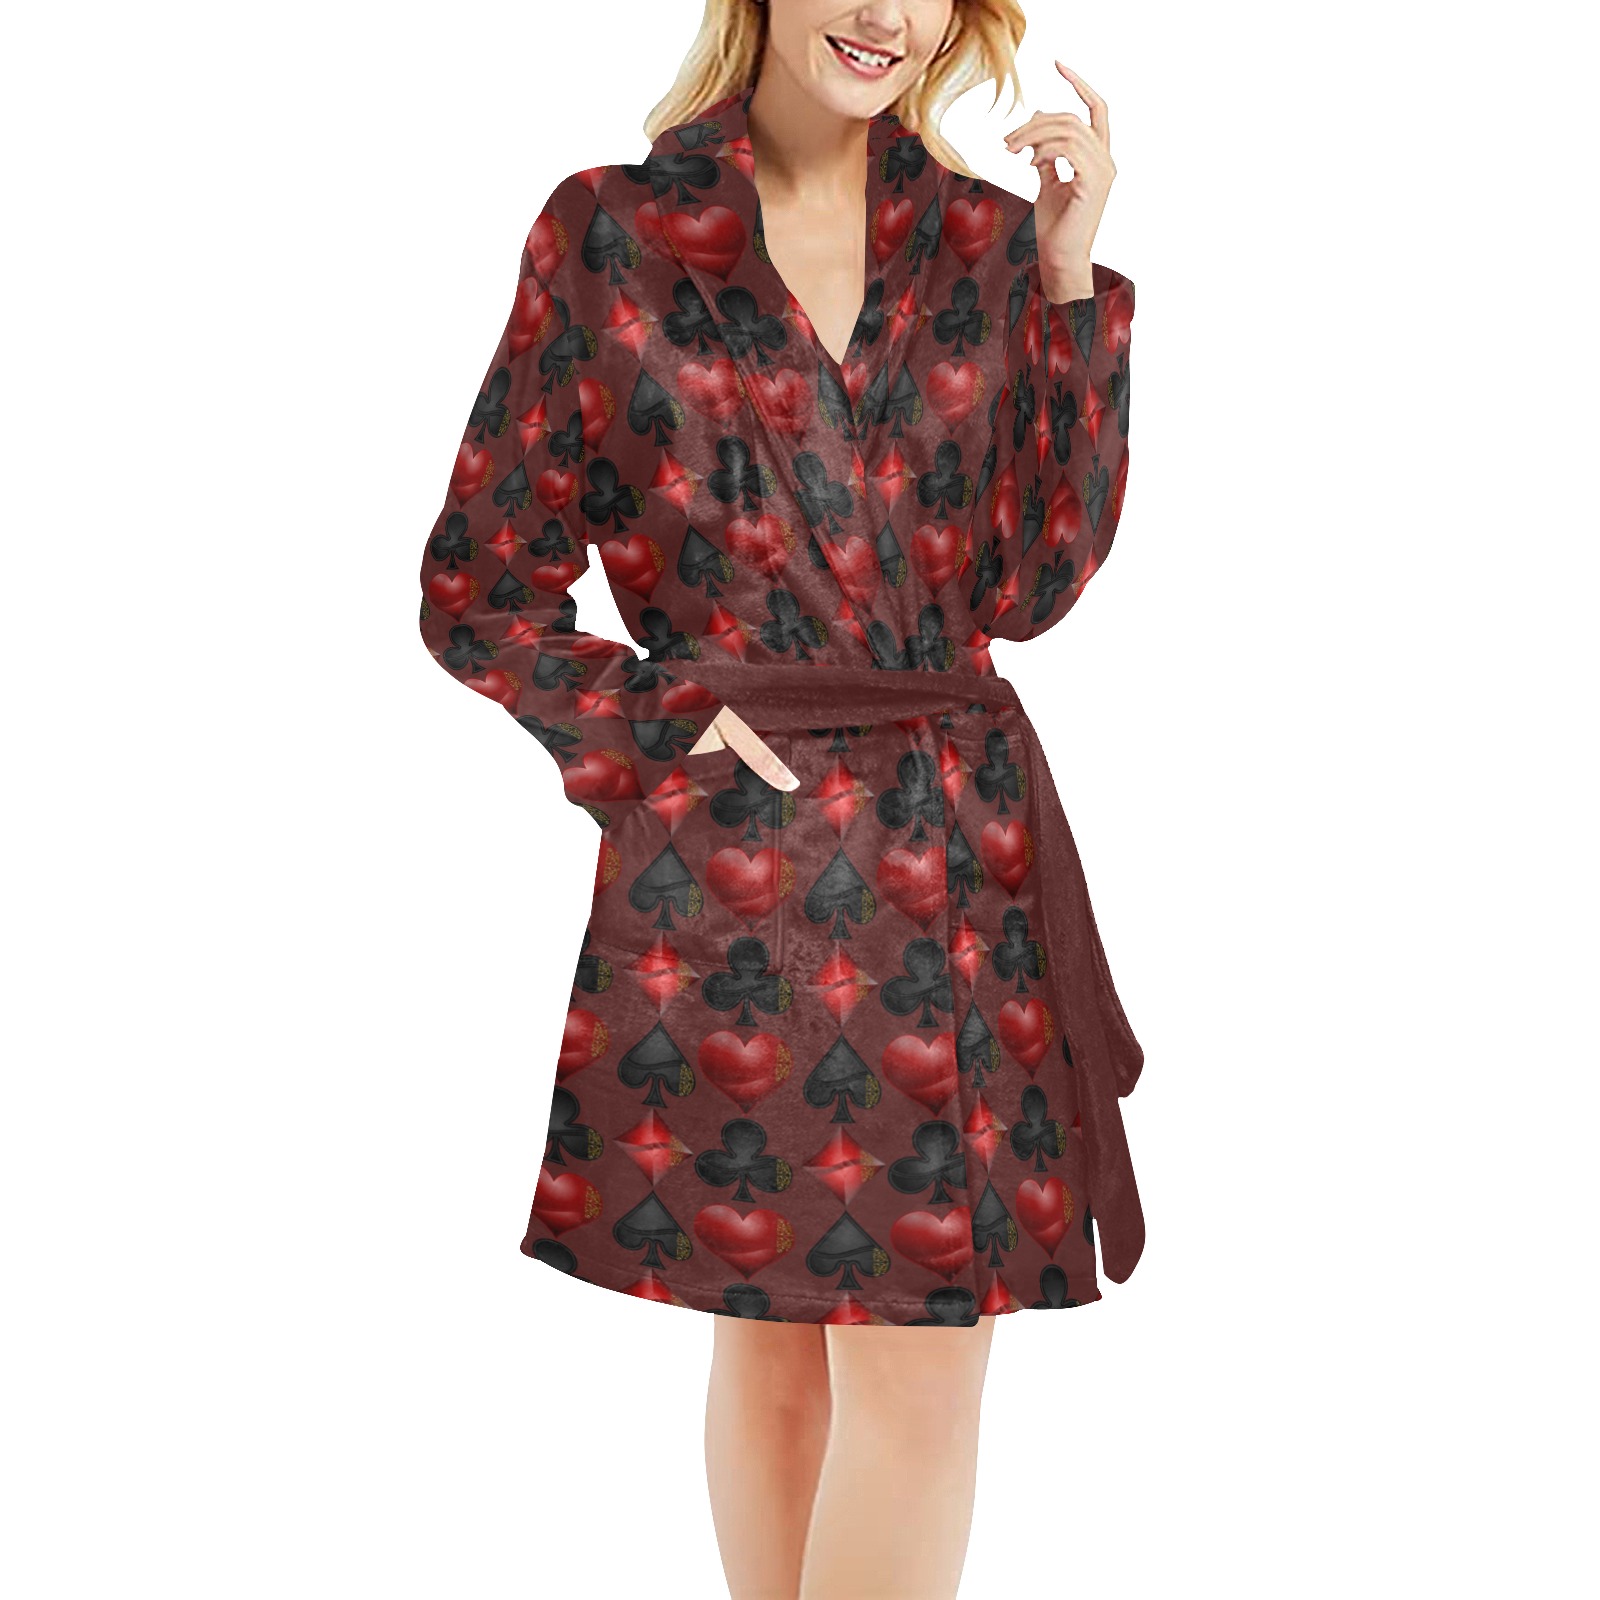 Black Red Playing Card Shapes - Brown Women's All Over Print Night Robe